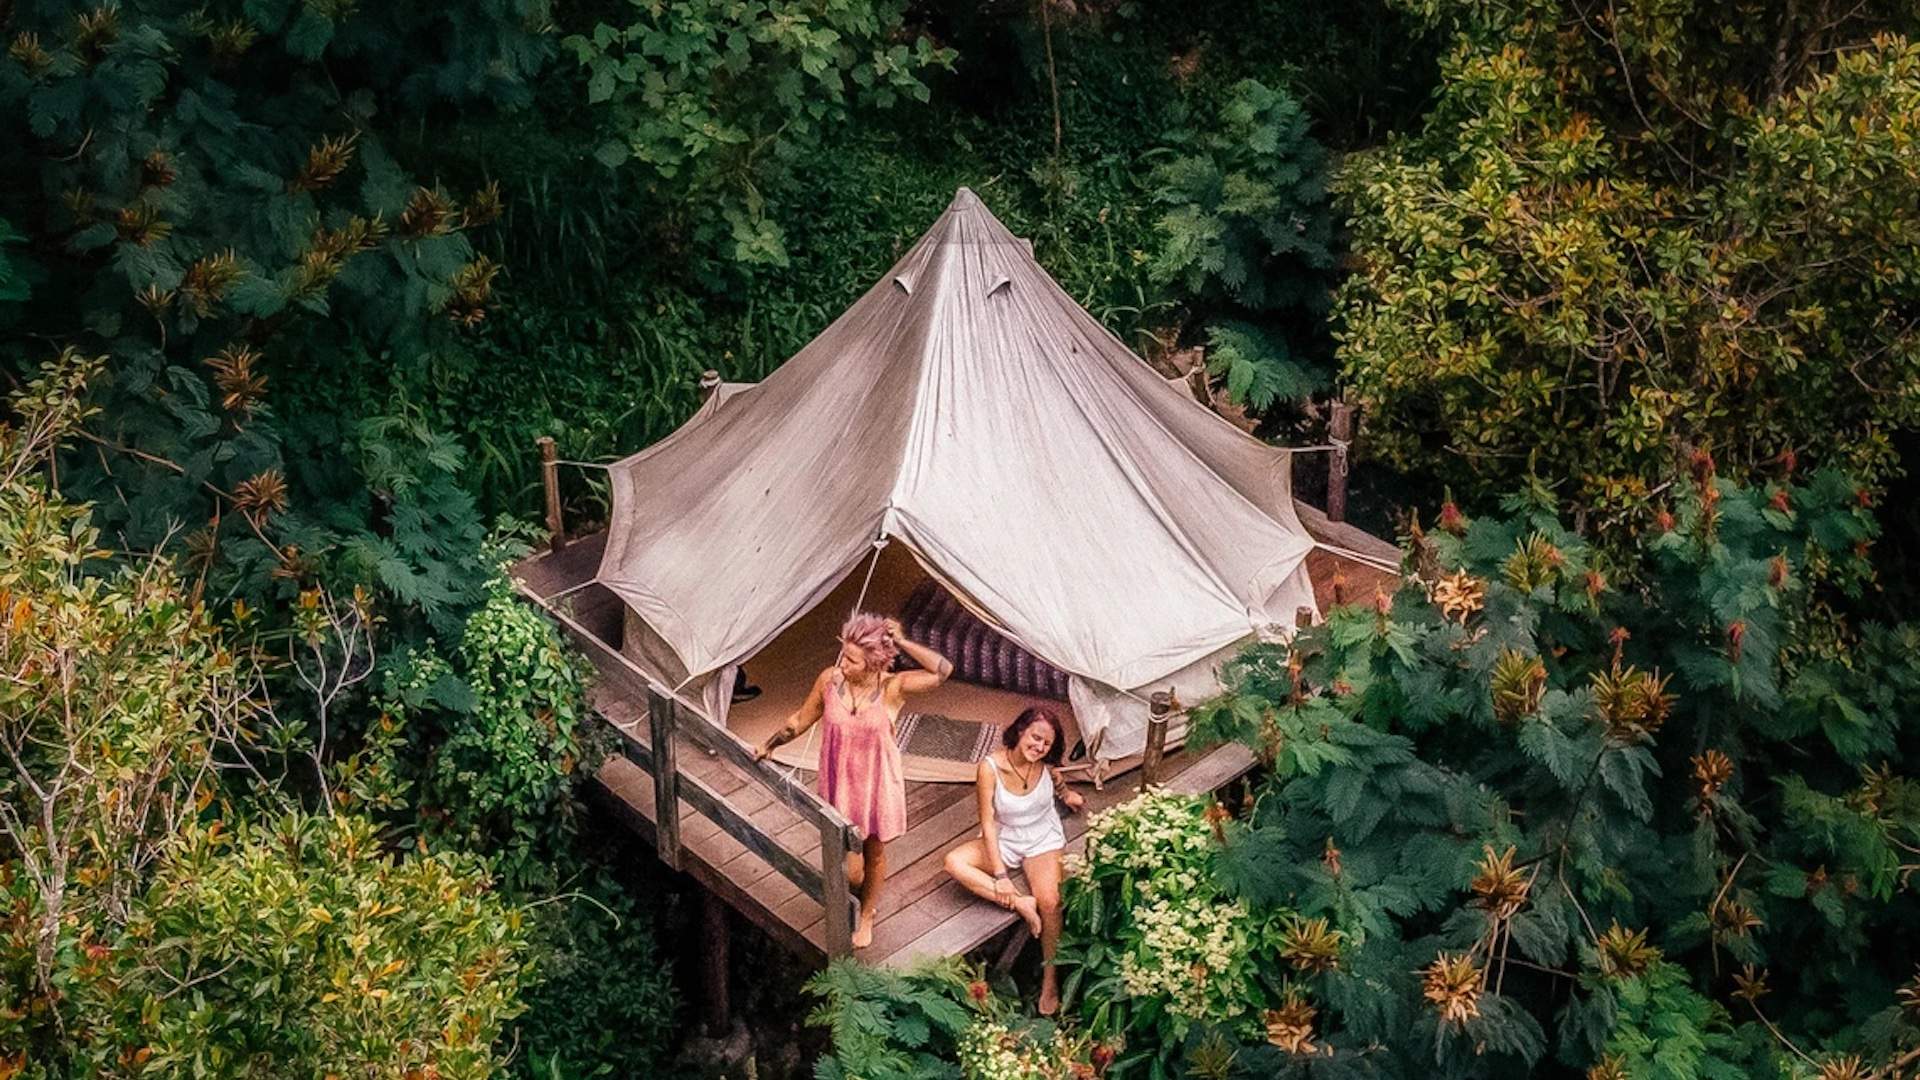 The Most Romantic Places to Stay in Bali When Proposals and Honeymoons Come Calling